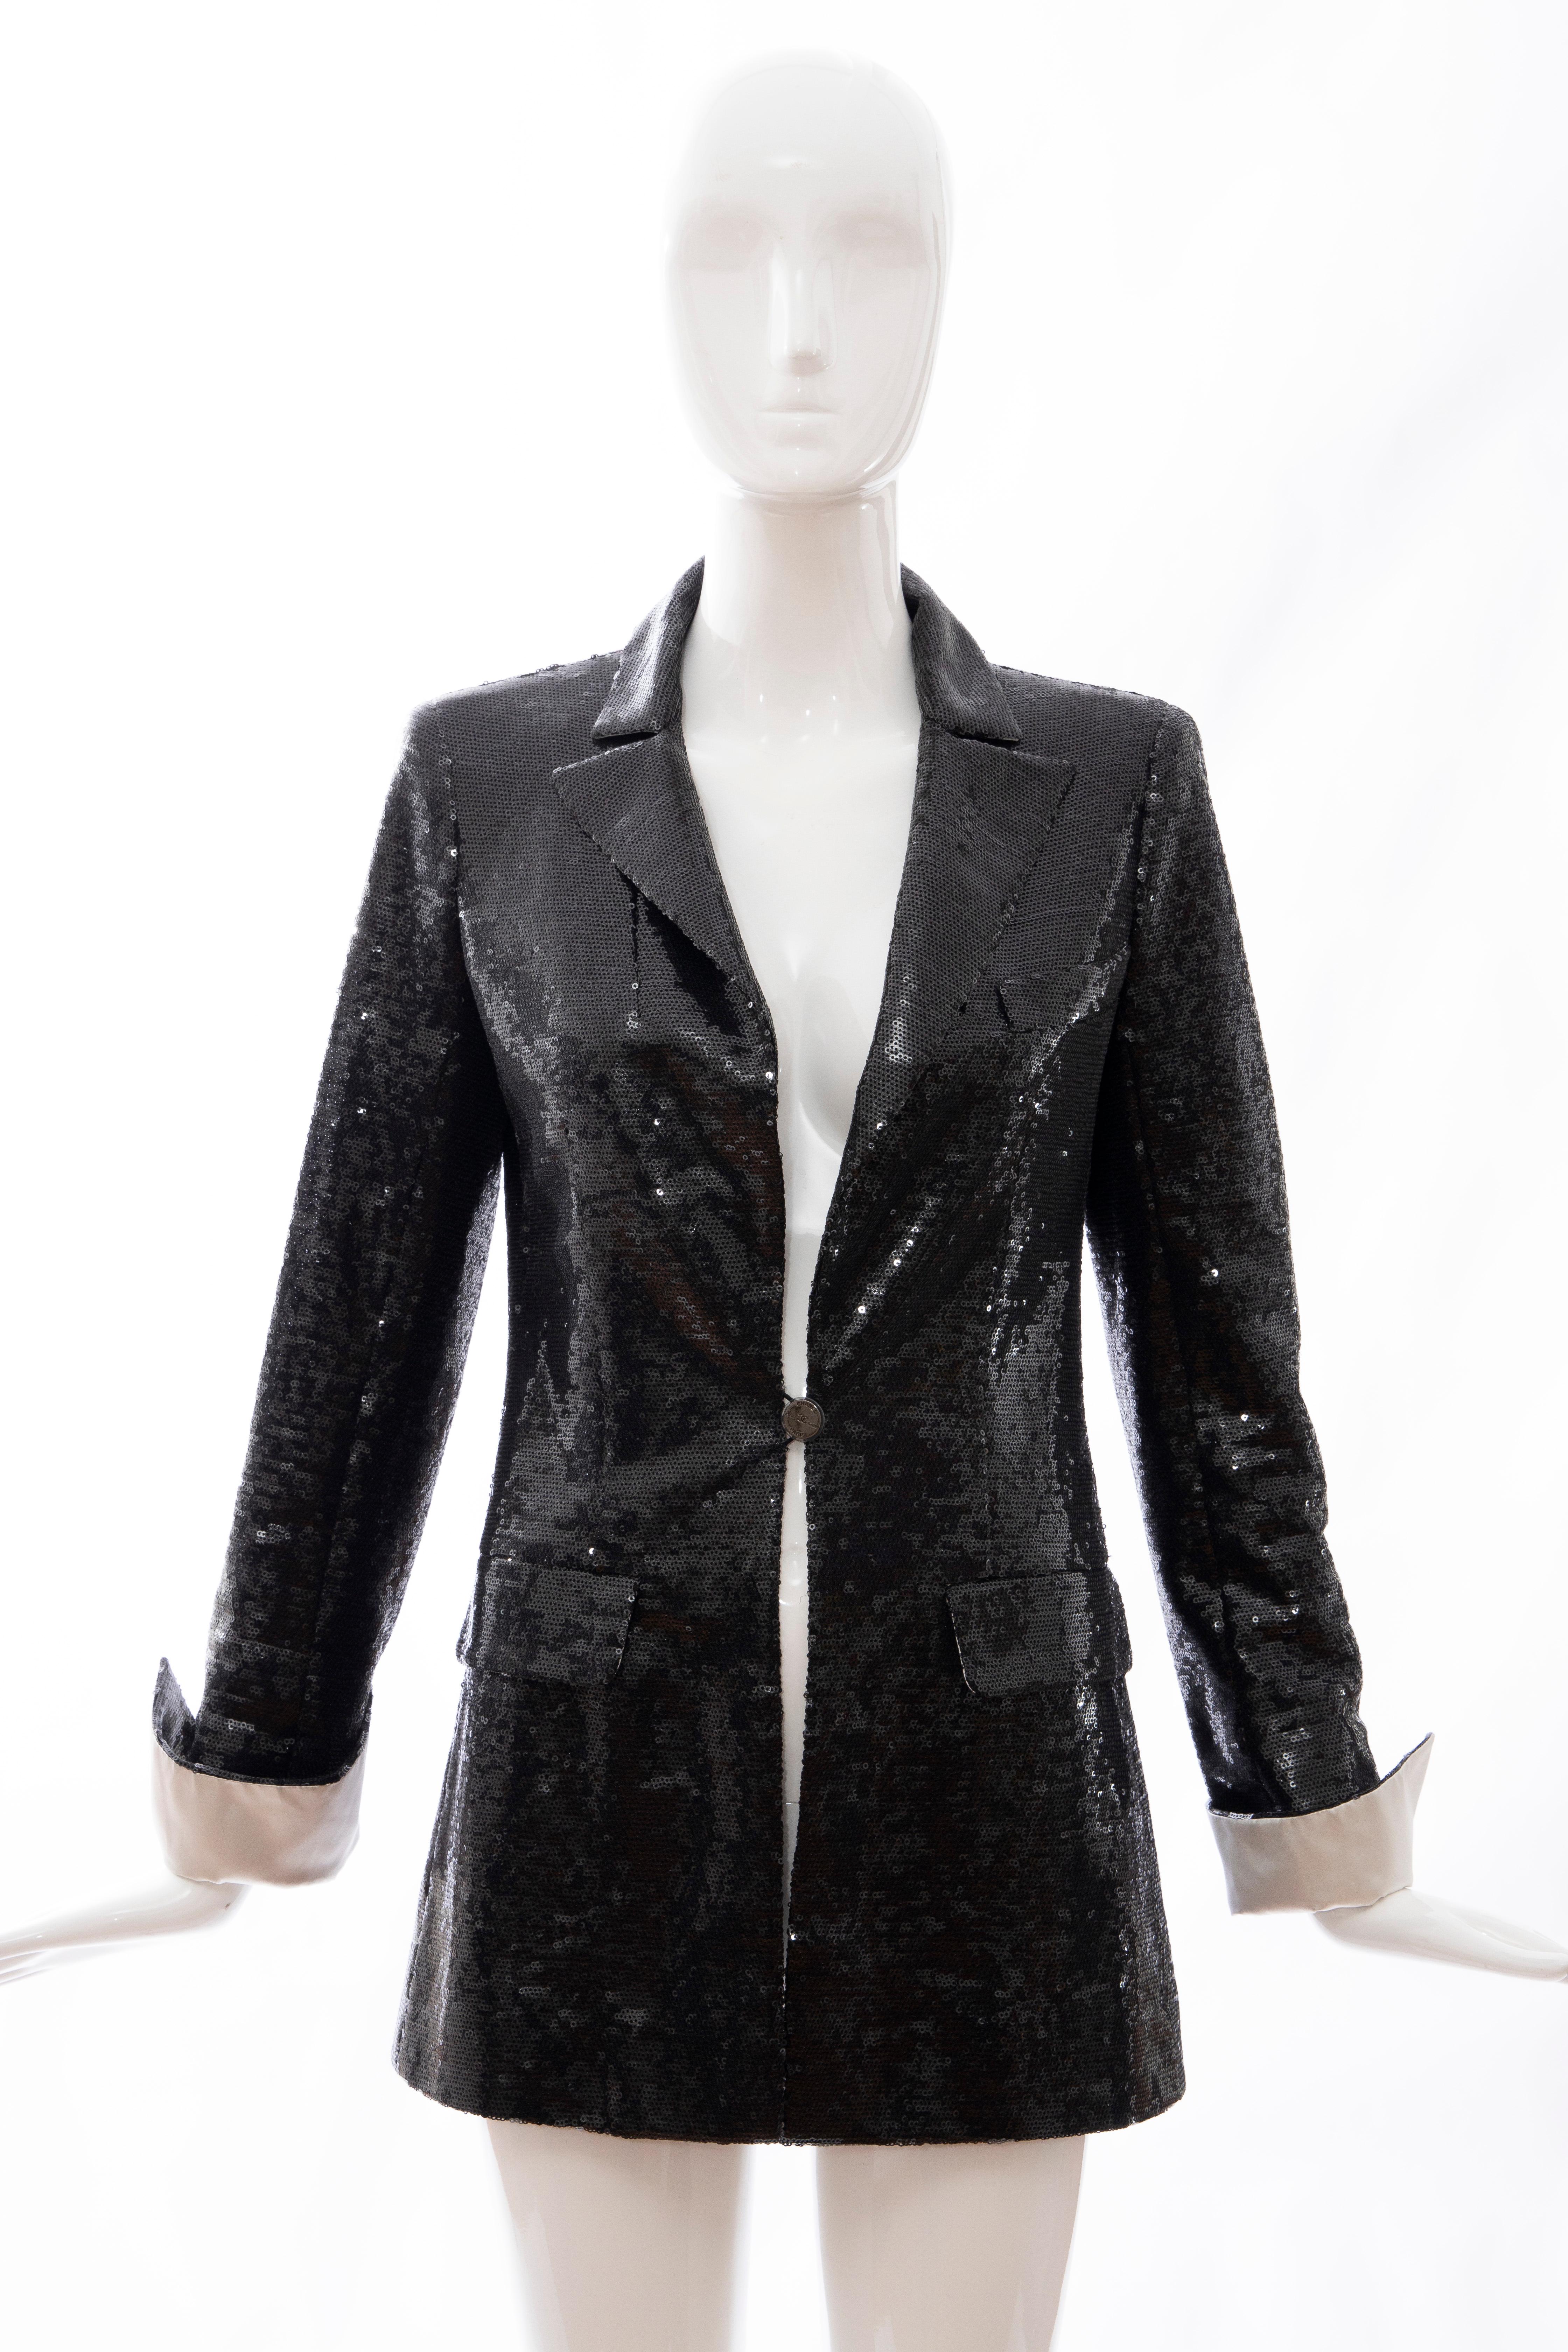 Chanel Black Embroidered Sequin Evening Jacket Ivory Silk Cuffs, Cruise 2009 For Sale 5